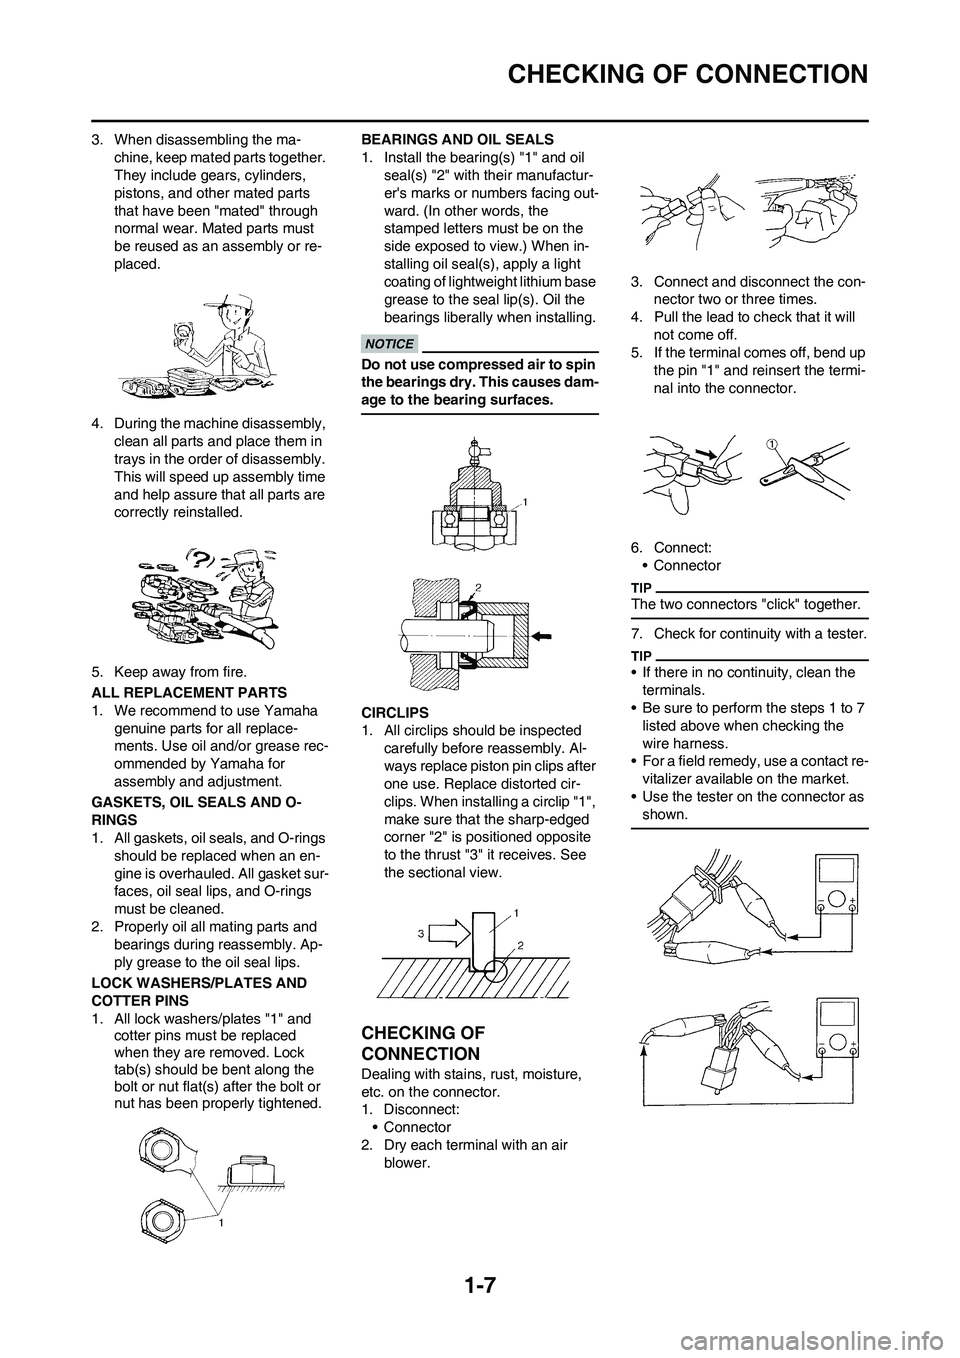 YAMAHA WR 450F 2010  Owners Manual 
1-7
CHECKING OF CONNECTION
3. When disassembling the ma-chine, keep mated parts together. 
They include gears, cylinders, 
pistons, and other mated parts 
that have been "mated" through 
normal wear.